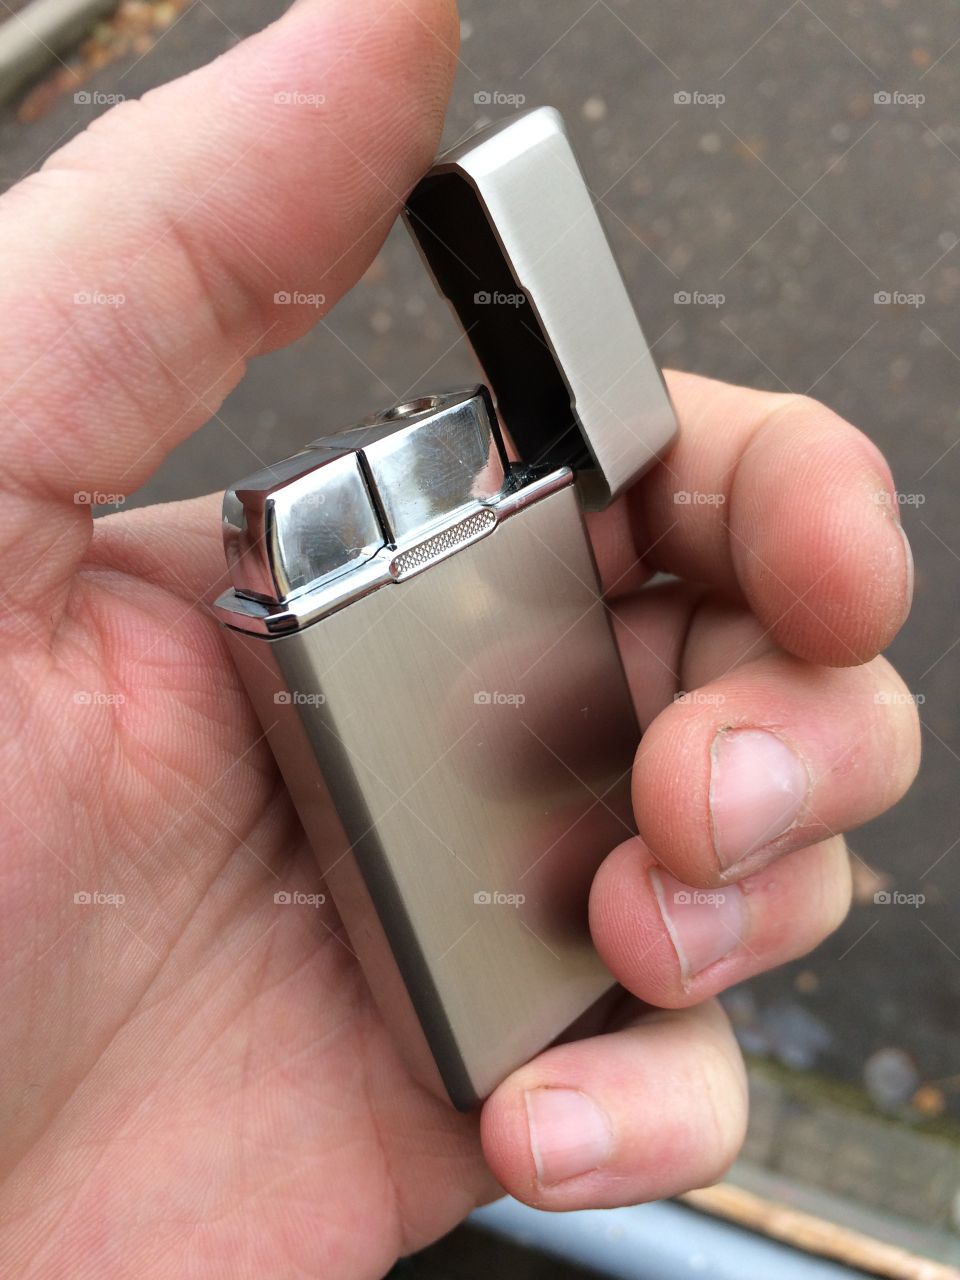 Lighter in the hand